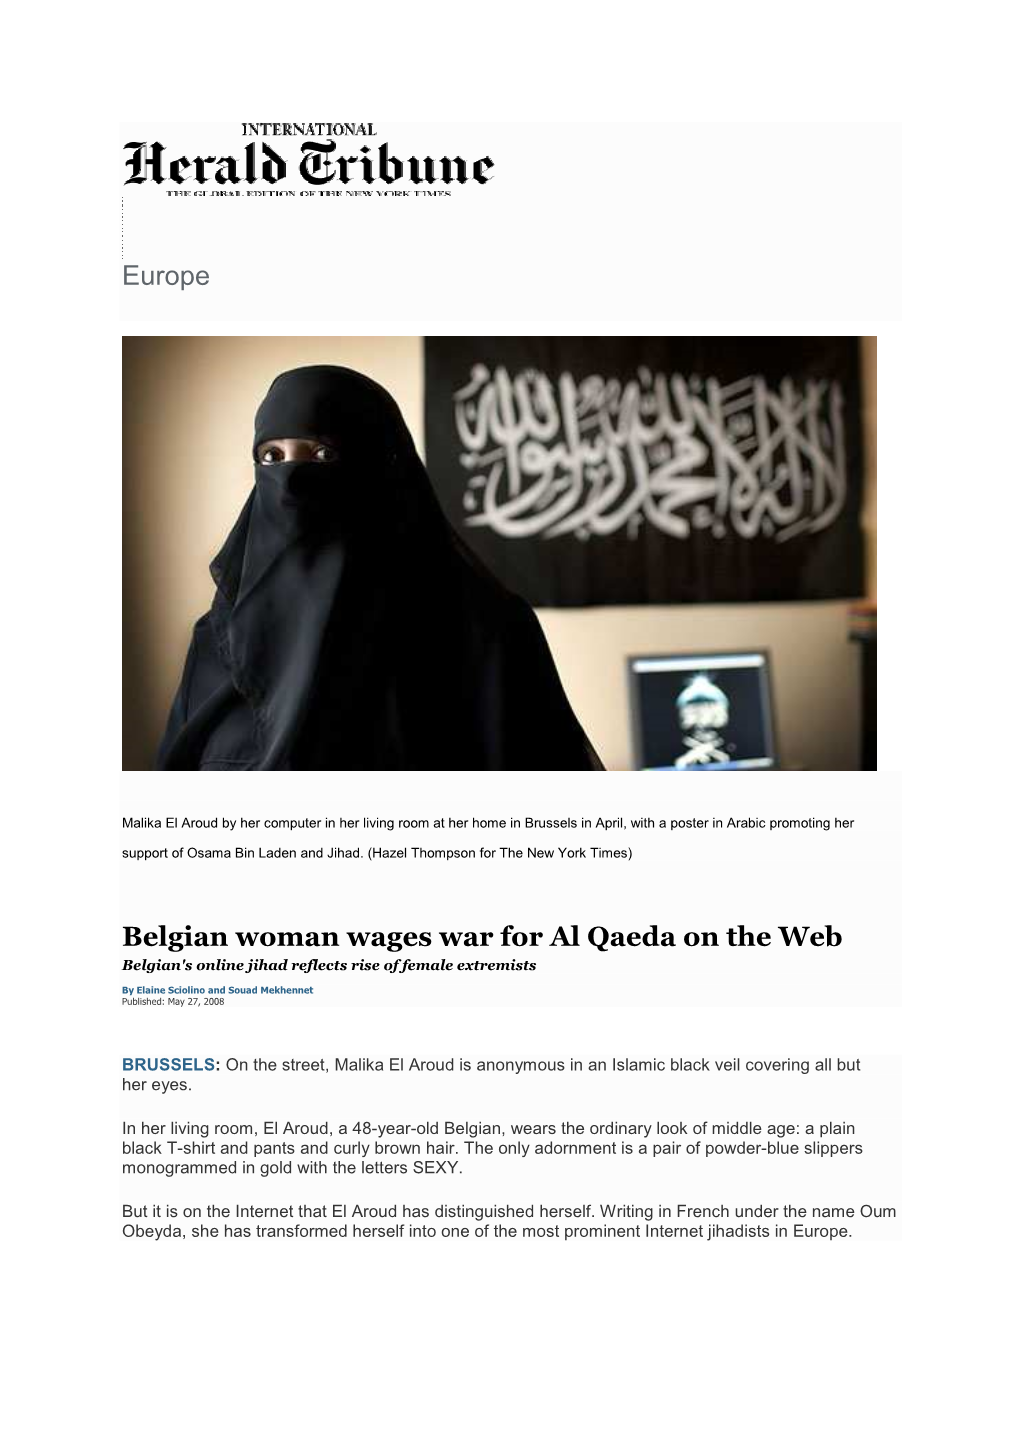 Belgian Woman Wages War for Al Qaeda on the Web Belgian's Online Jihad Reflects Rise of Female Extremists